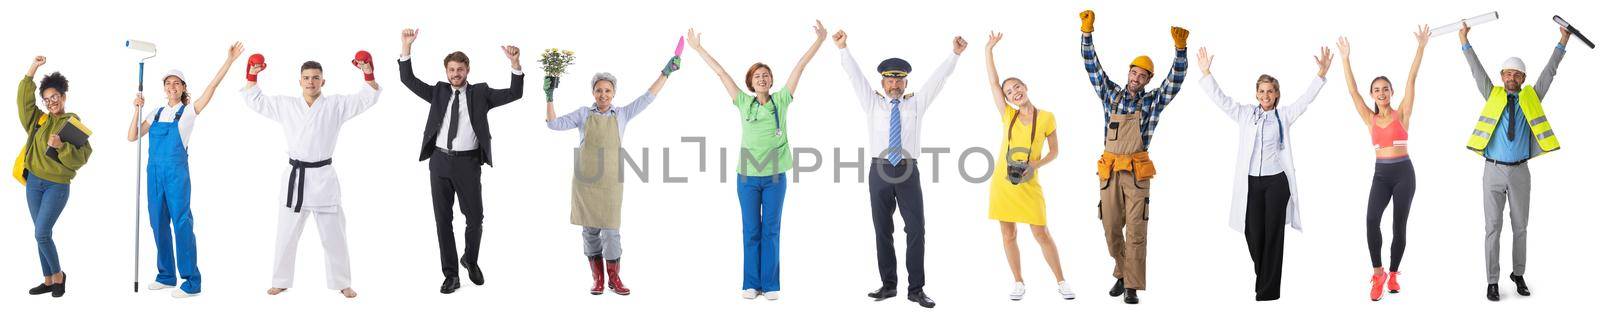 Group set of full portraits of happy people with arms raised representing diverse professions, isolated on white background